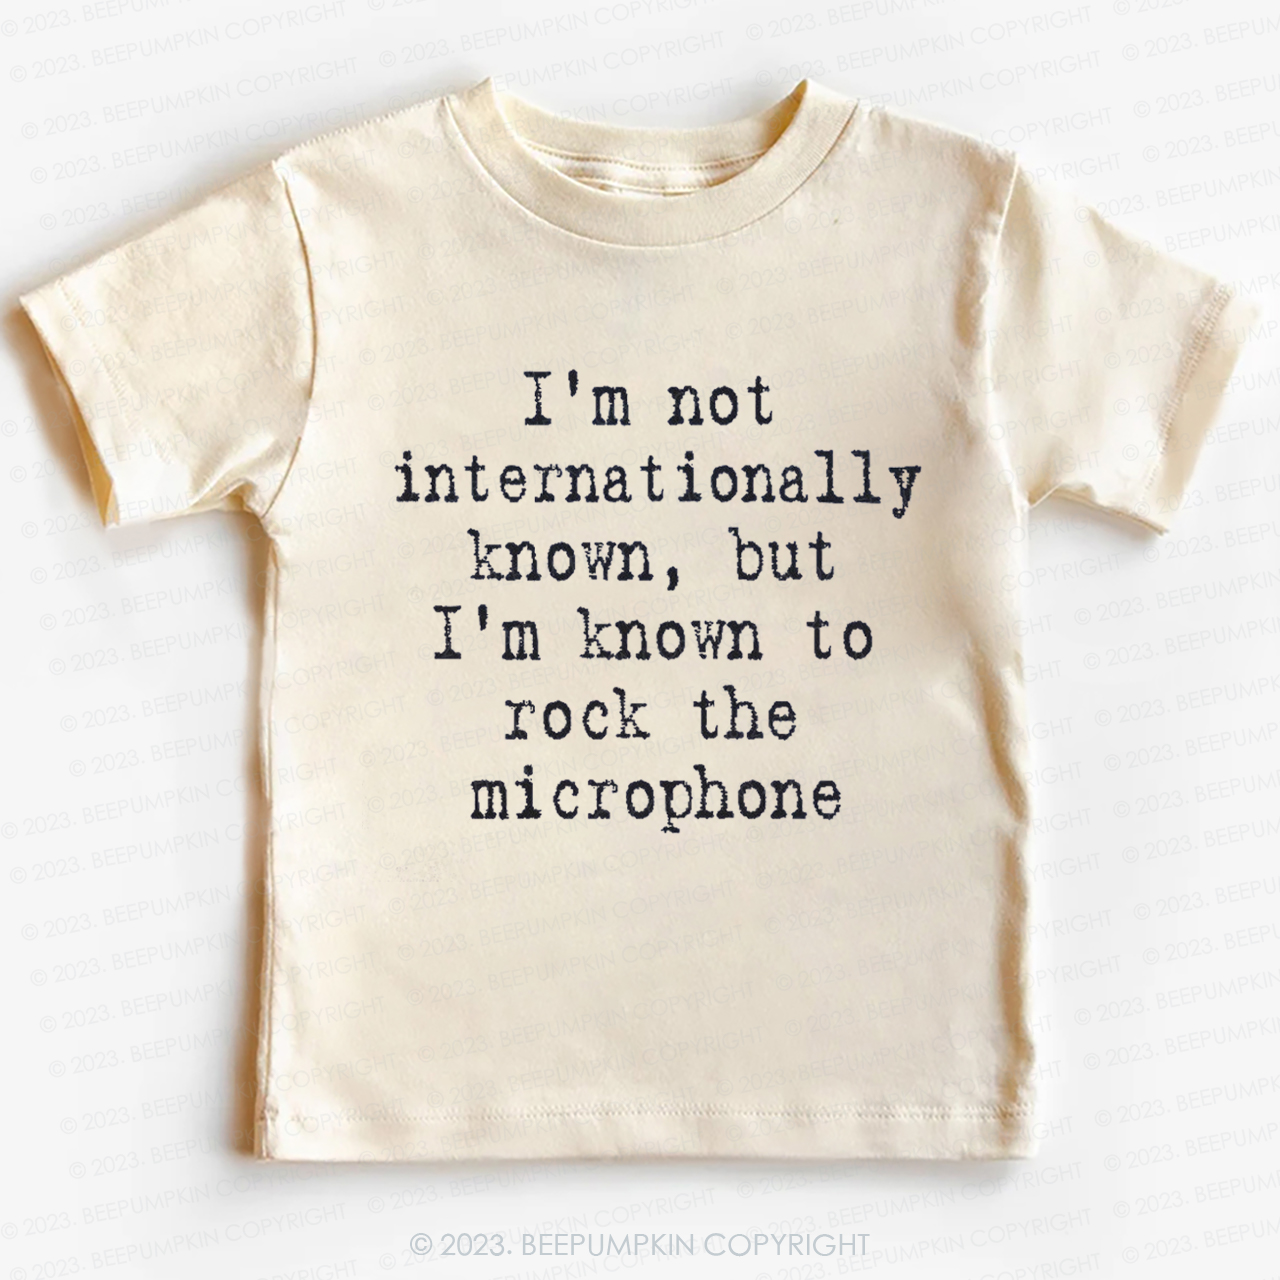 It Takes Two I'm Not Internationally Known Kids Shirt